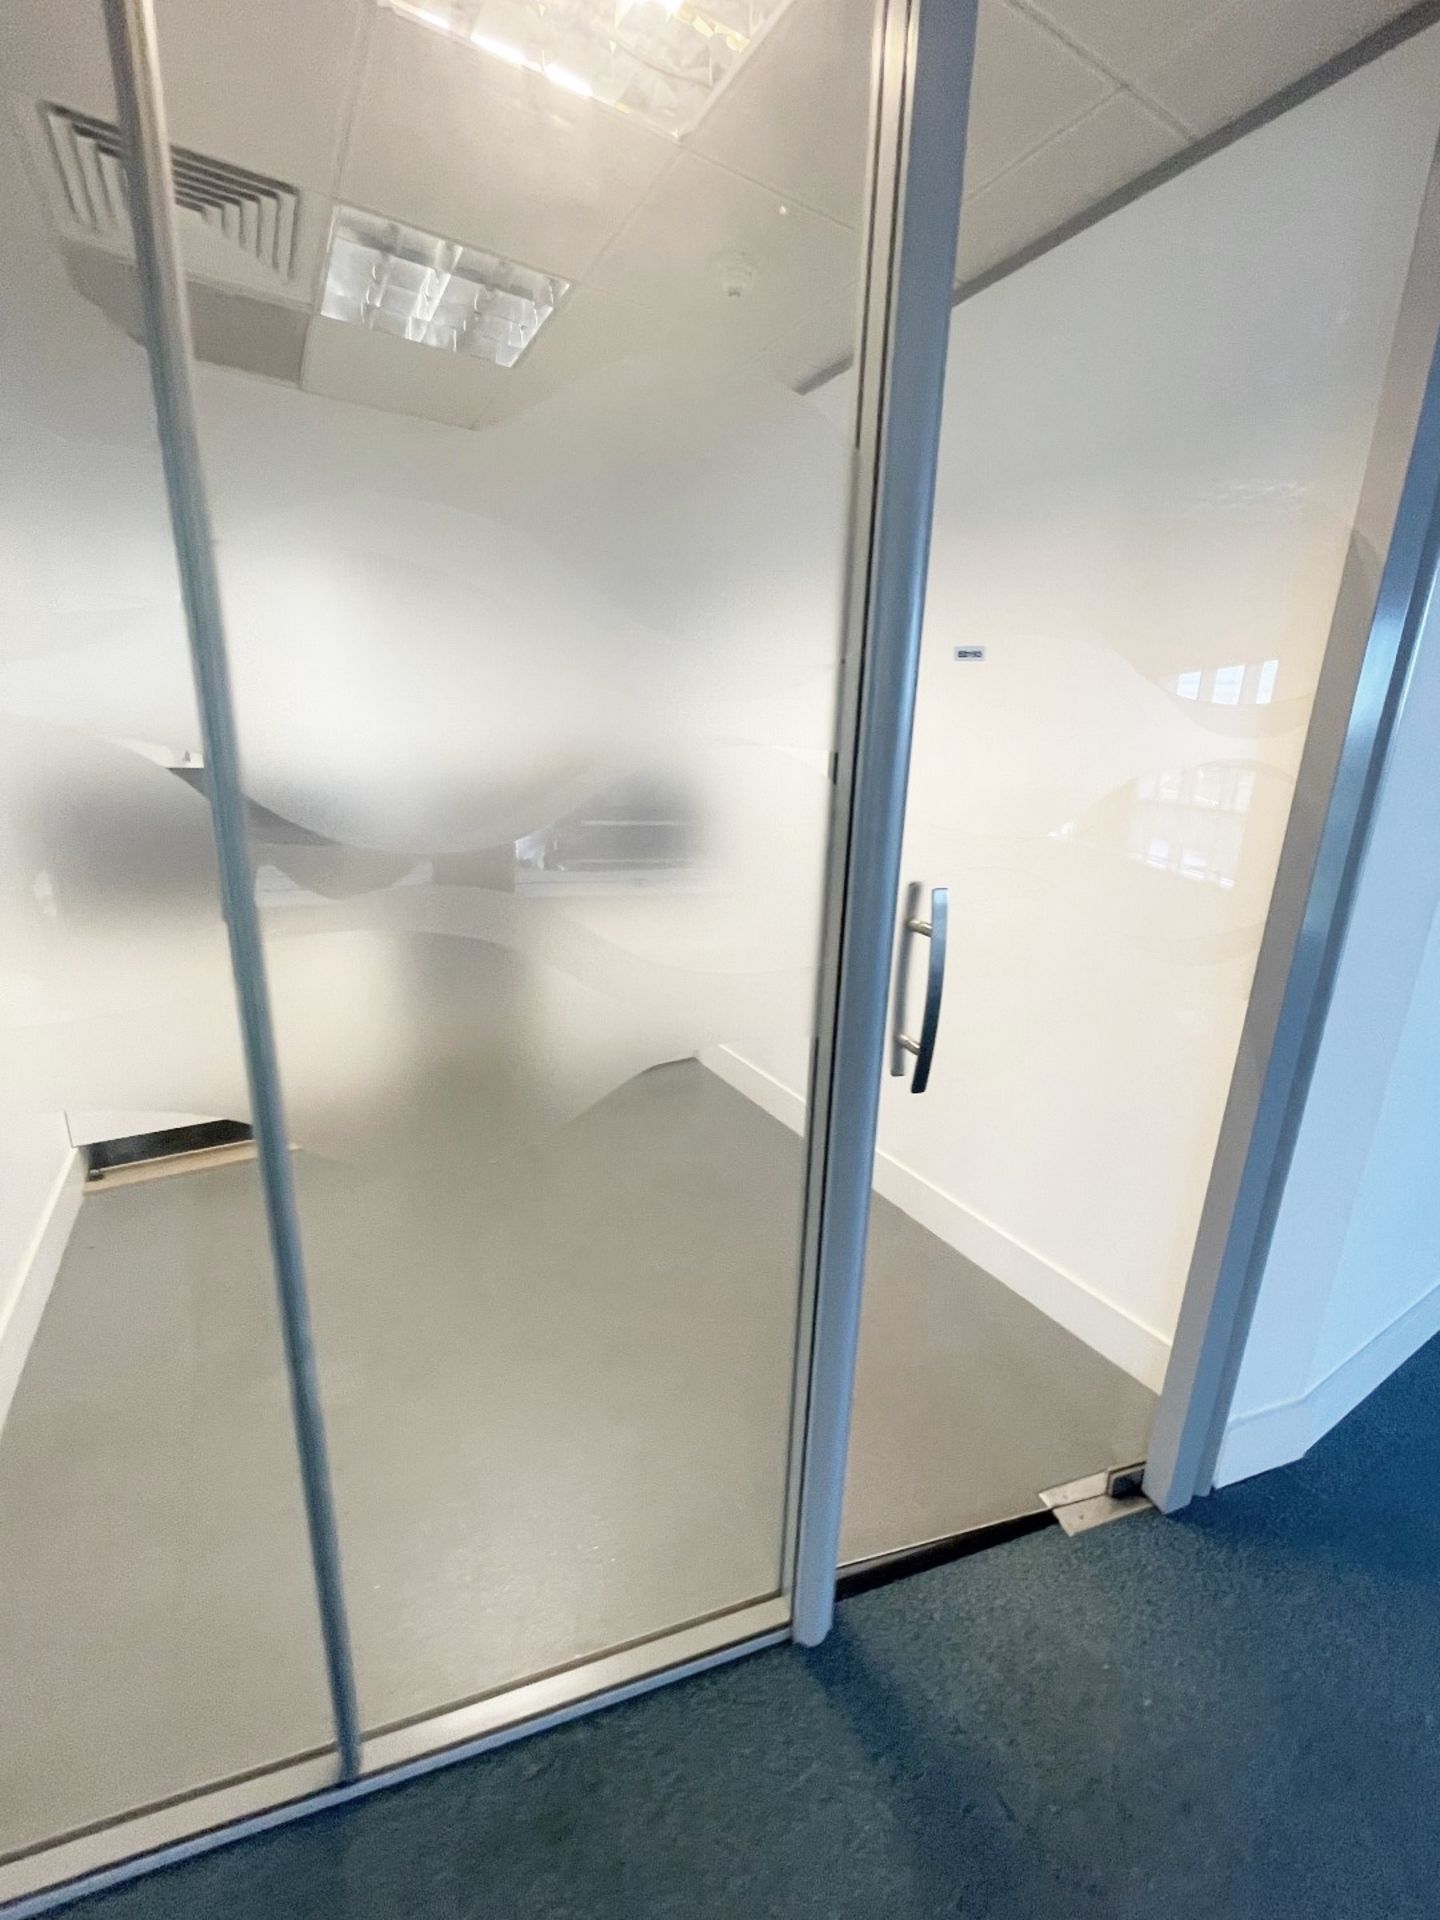 4 x Glass Office Cube Divider Panels - Inc. 2 x Glass Panels and Door - Currently Covering 237cm - Image 3 of 4